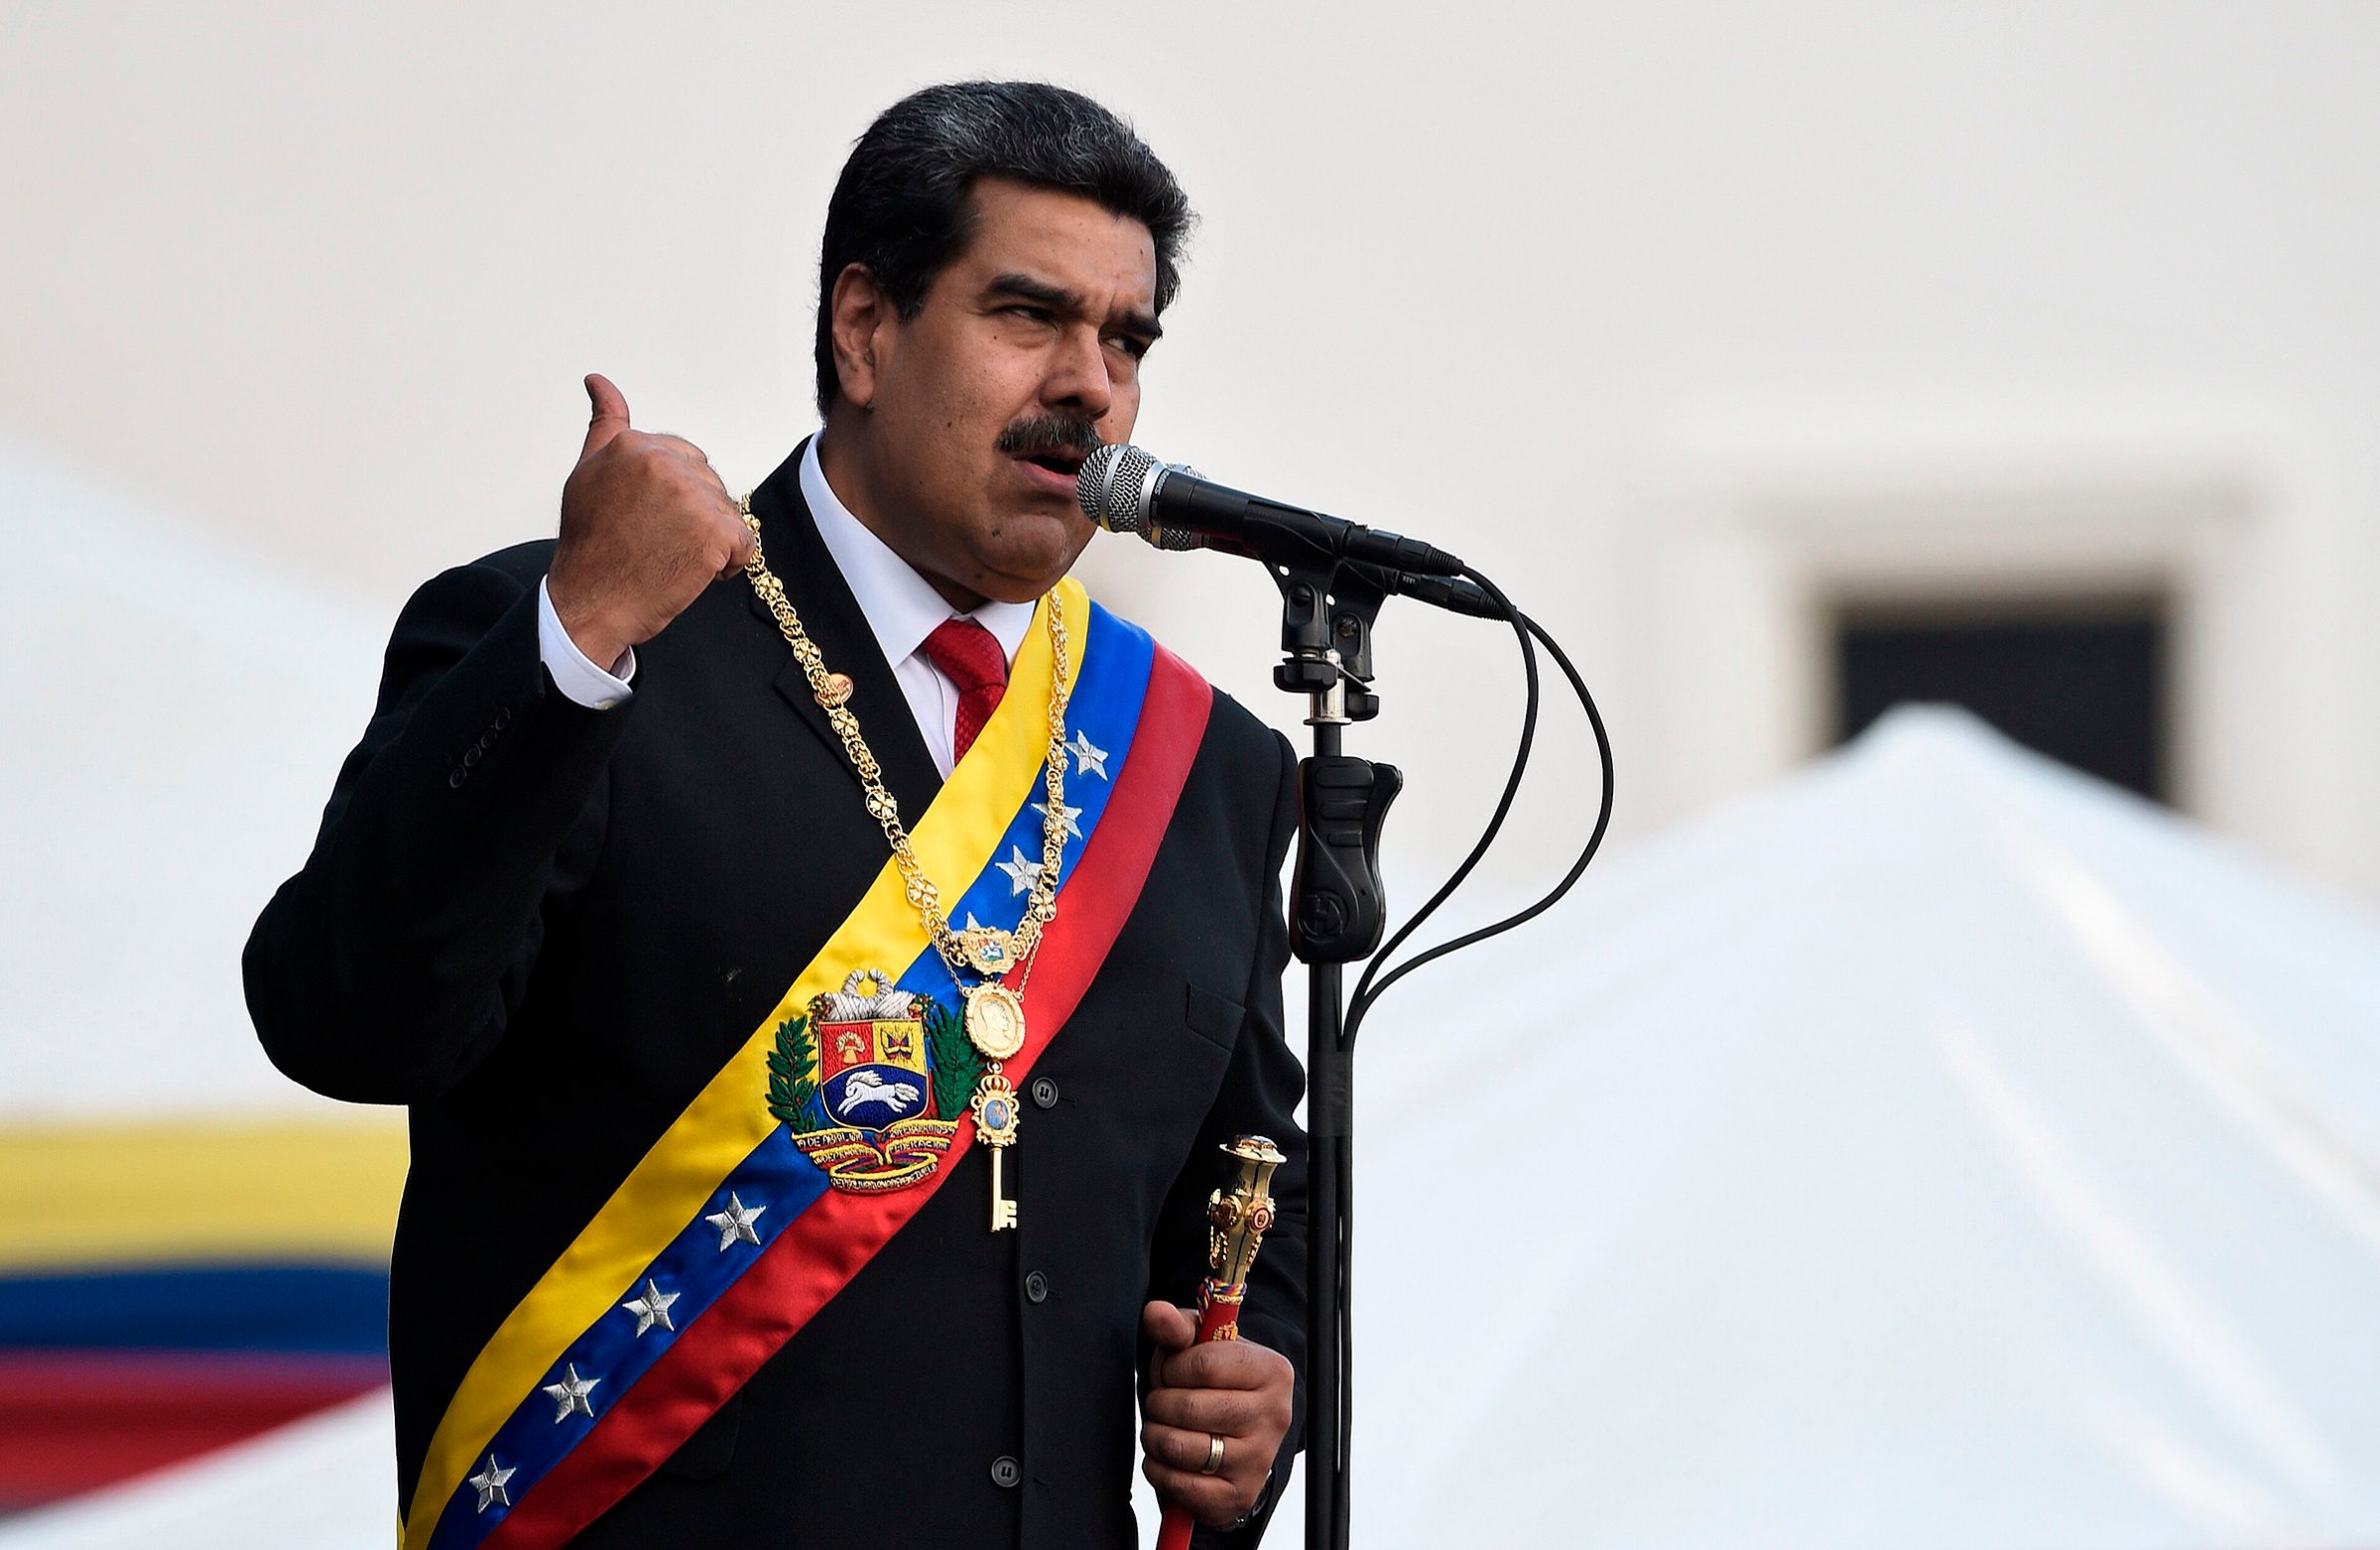 Venezuela's President Nicolas Maduro delivers a speech during the ceremony of recognition by the Bolivarian National Armed Forces (FANB) after being sworn in for a second term, at the Fuerte Tiuna Military Complex, in Caracas on January 10, 2019.